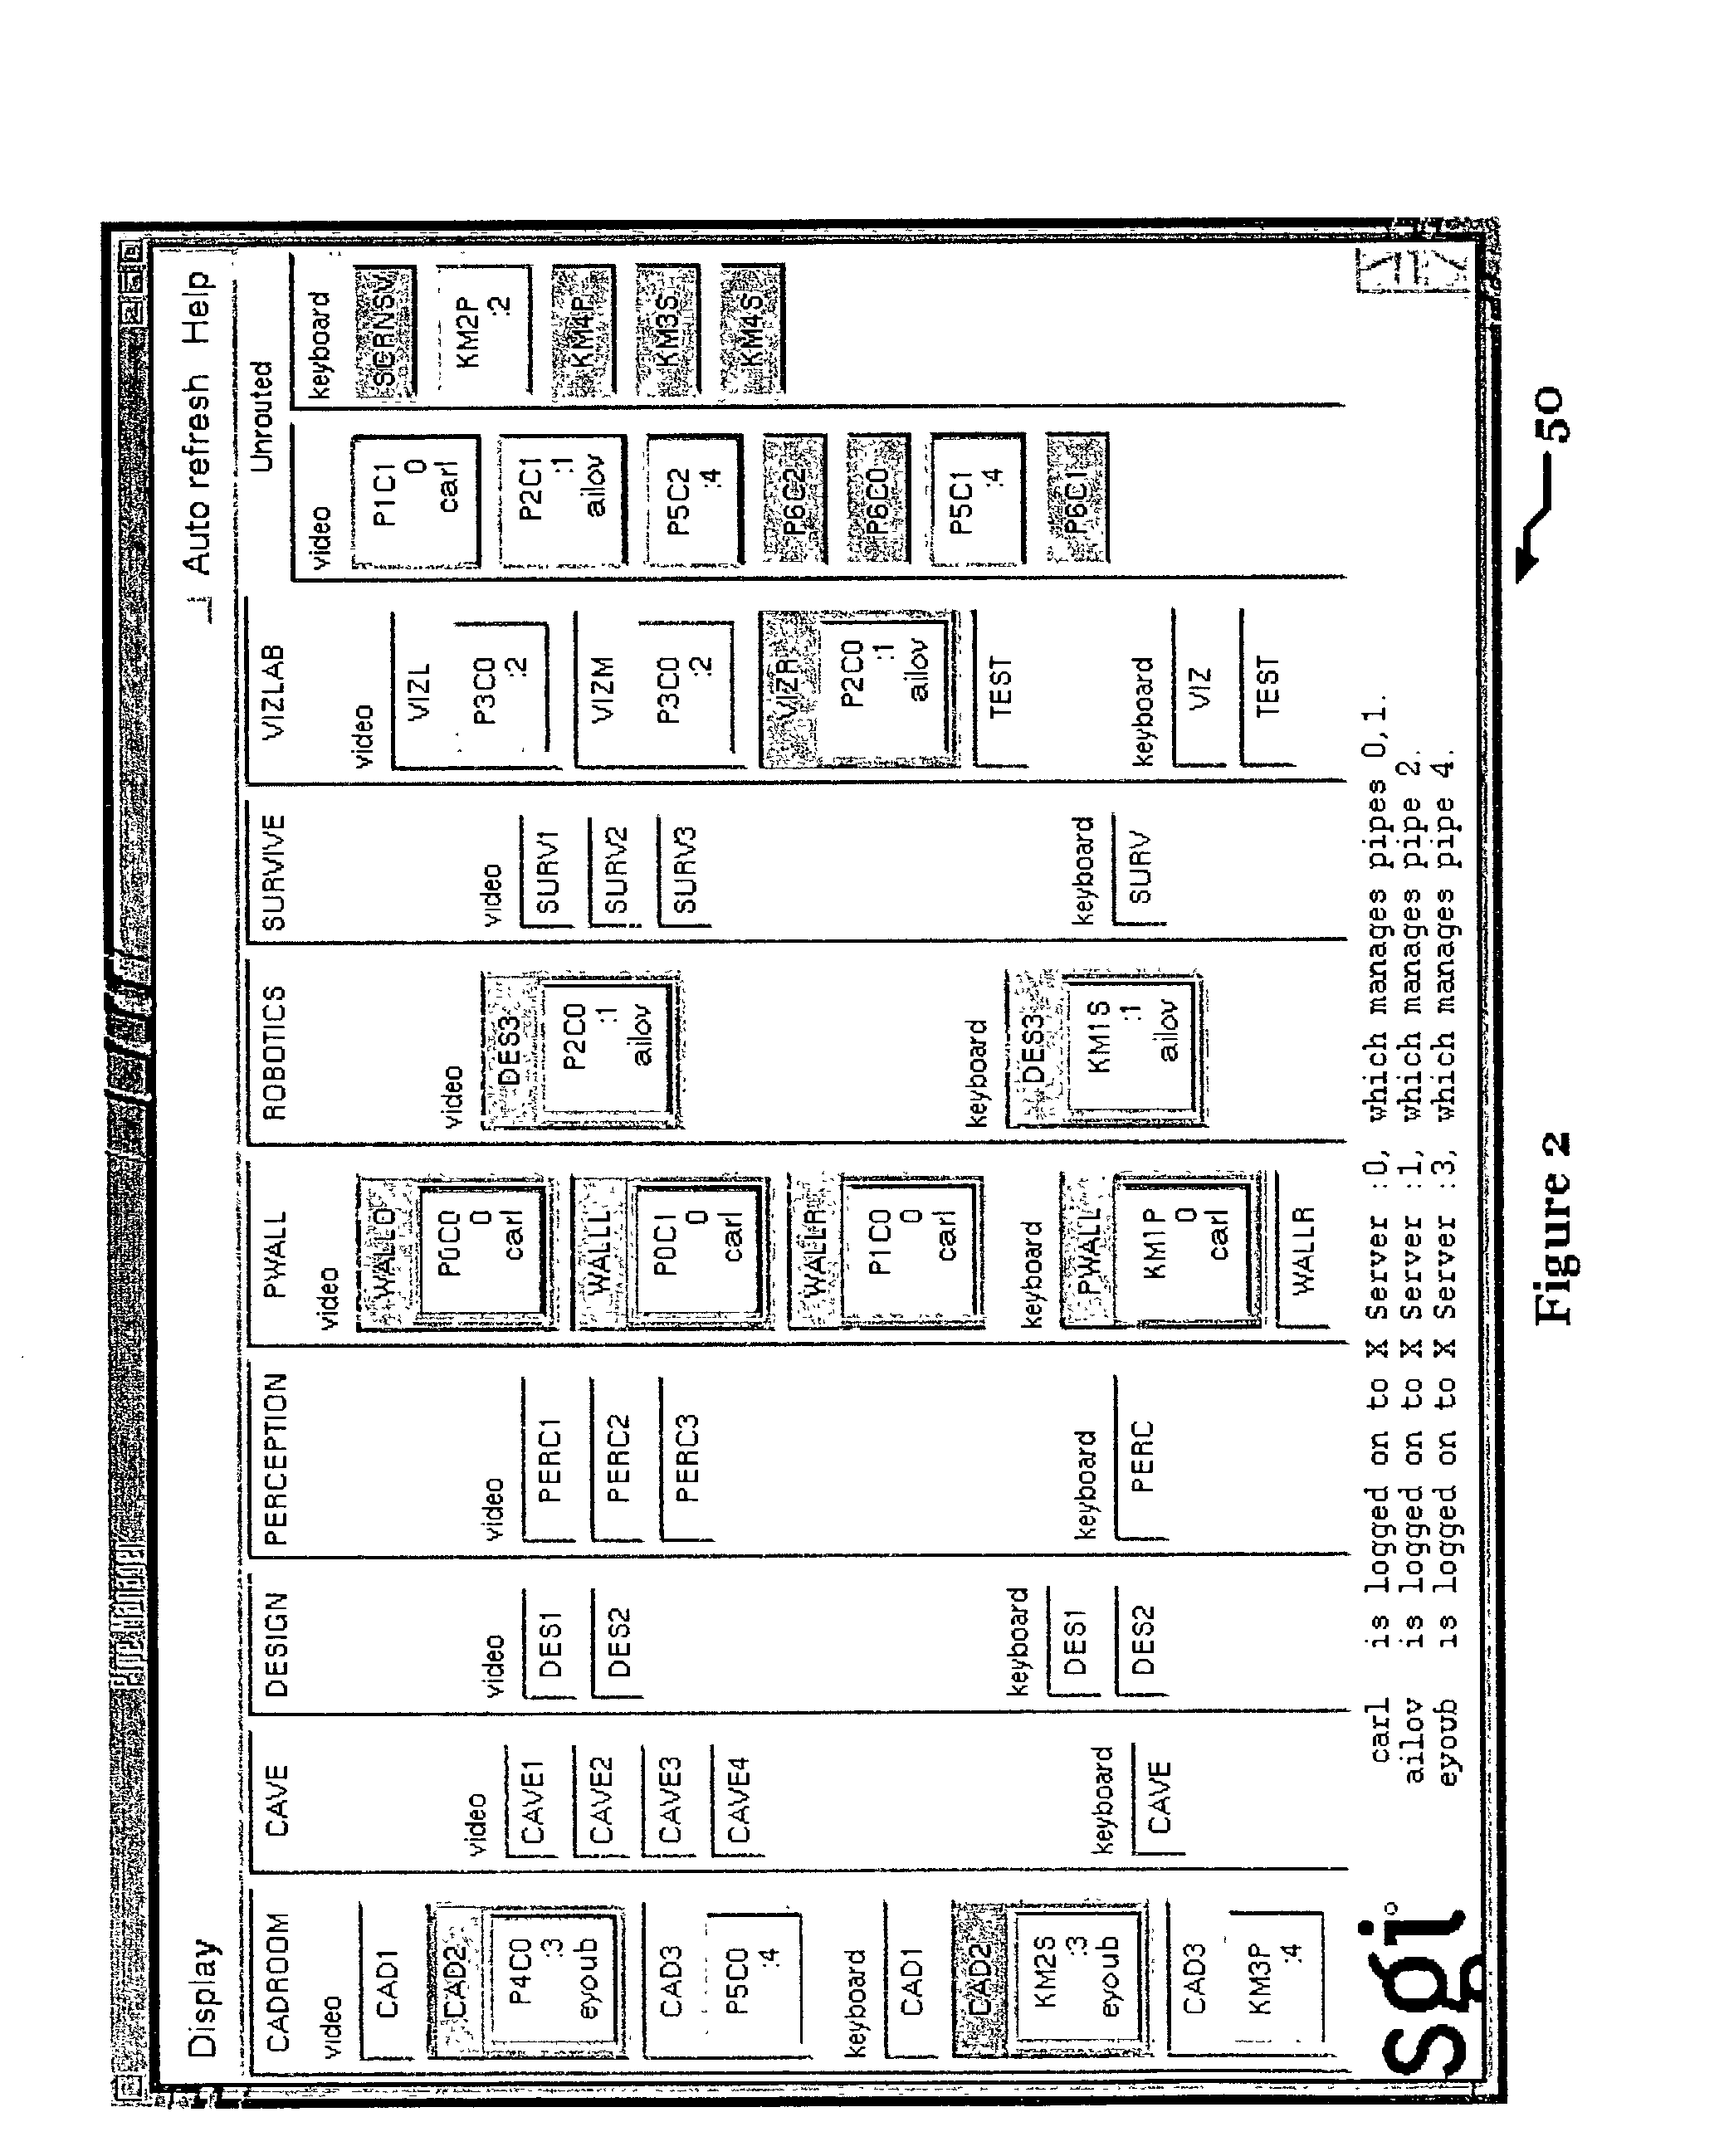 System and method for allocating computing resources